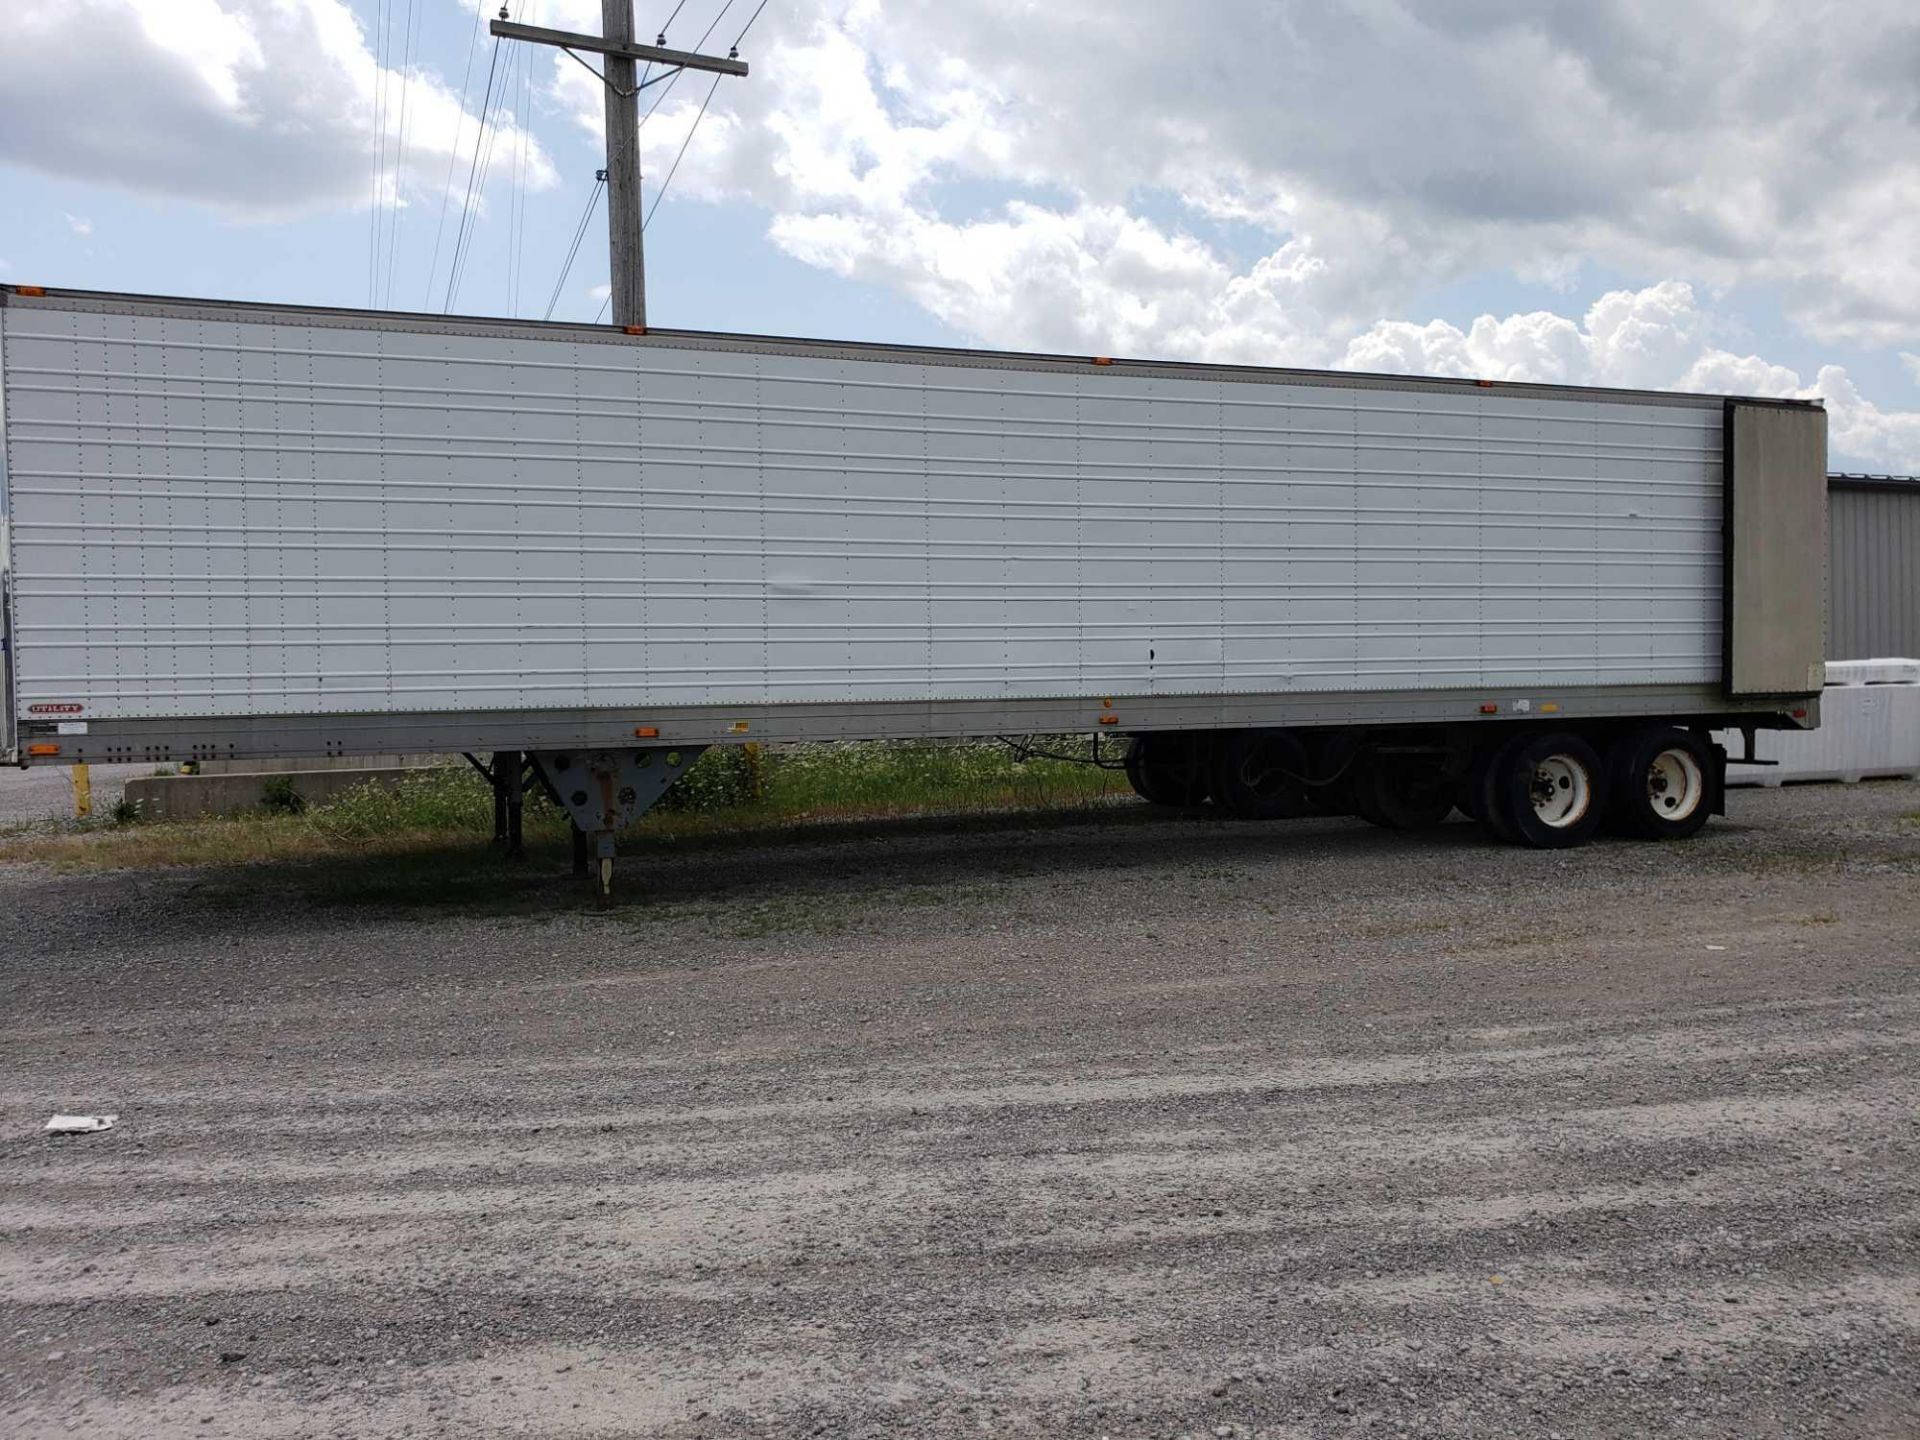 1991 Utility Trailer Company 53" trailer. VIN 1UYVS2480NM655711. Trailer is titled. No reefer unit. - Image 8 of 15